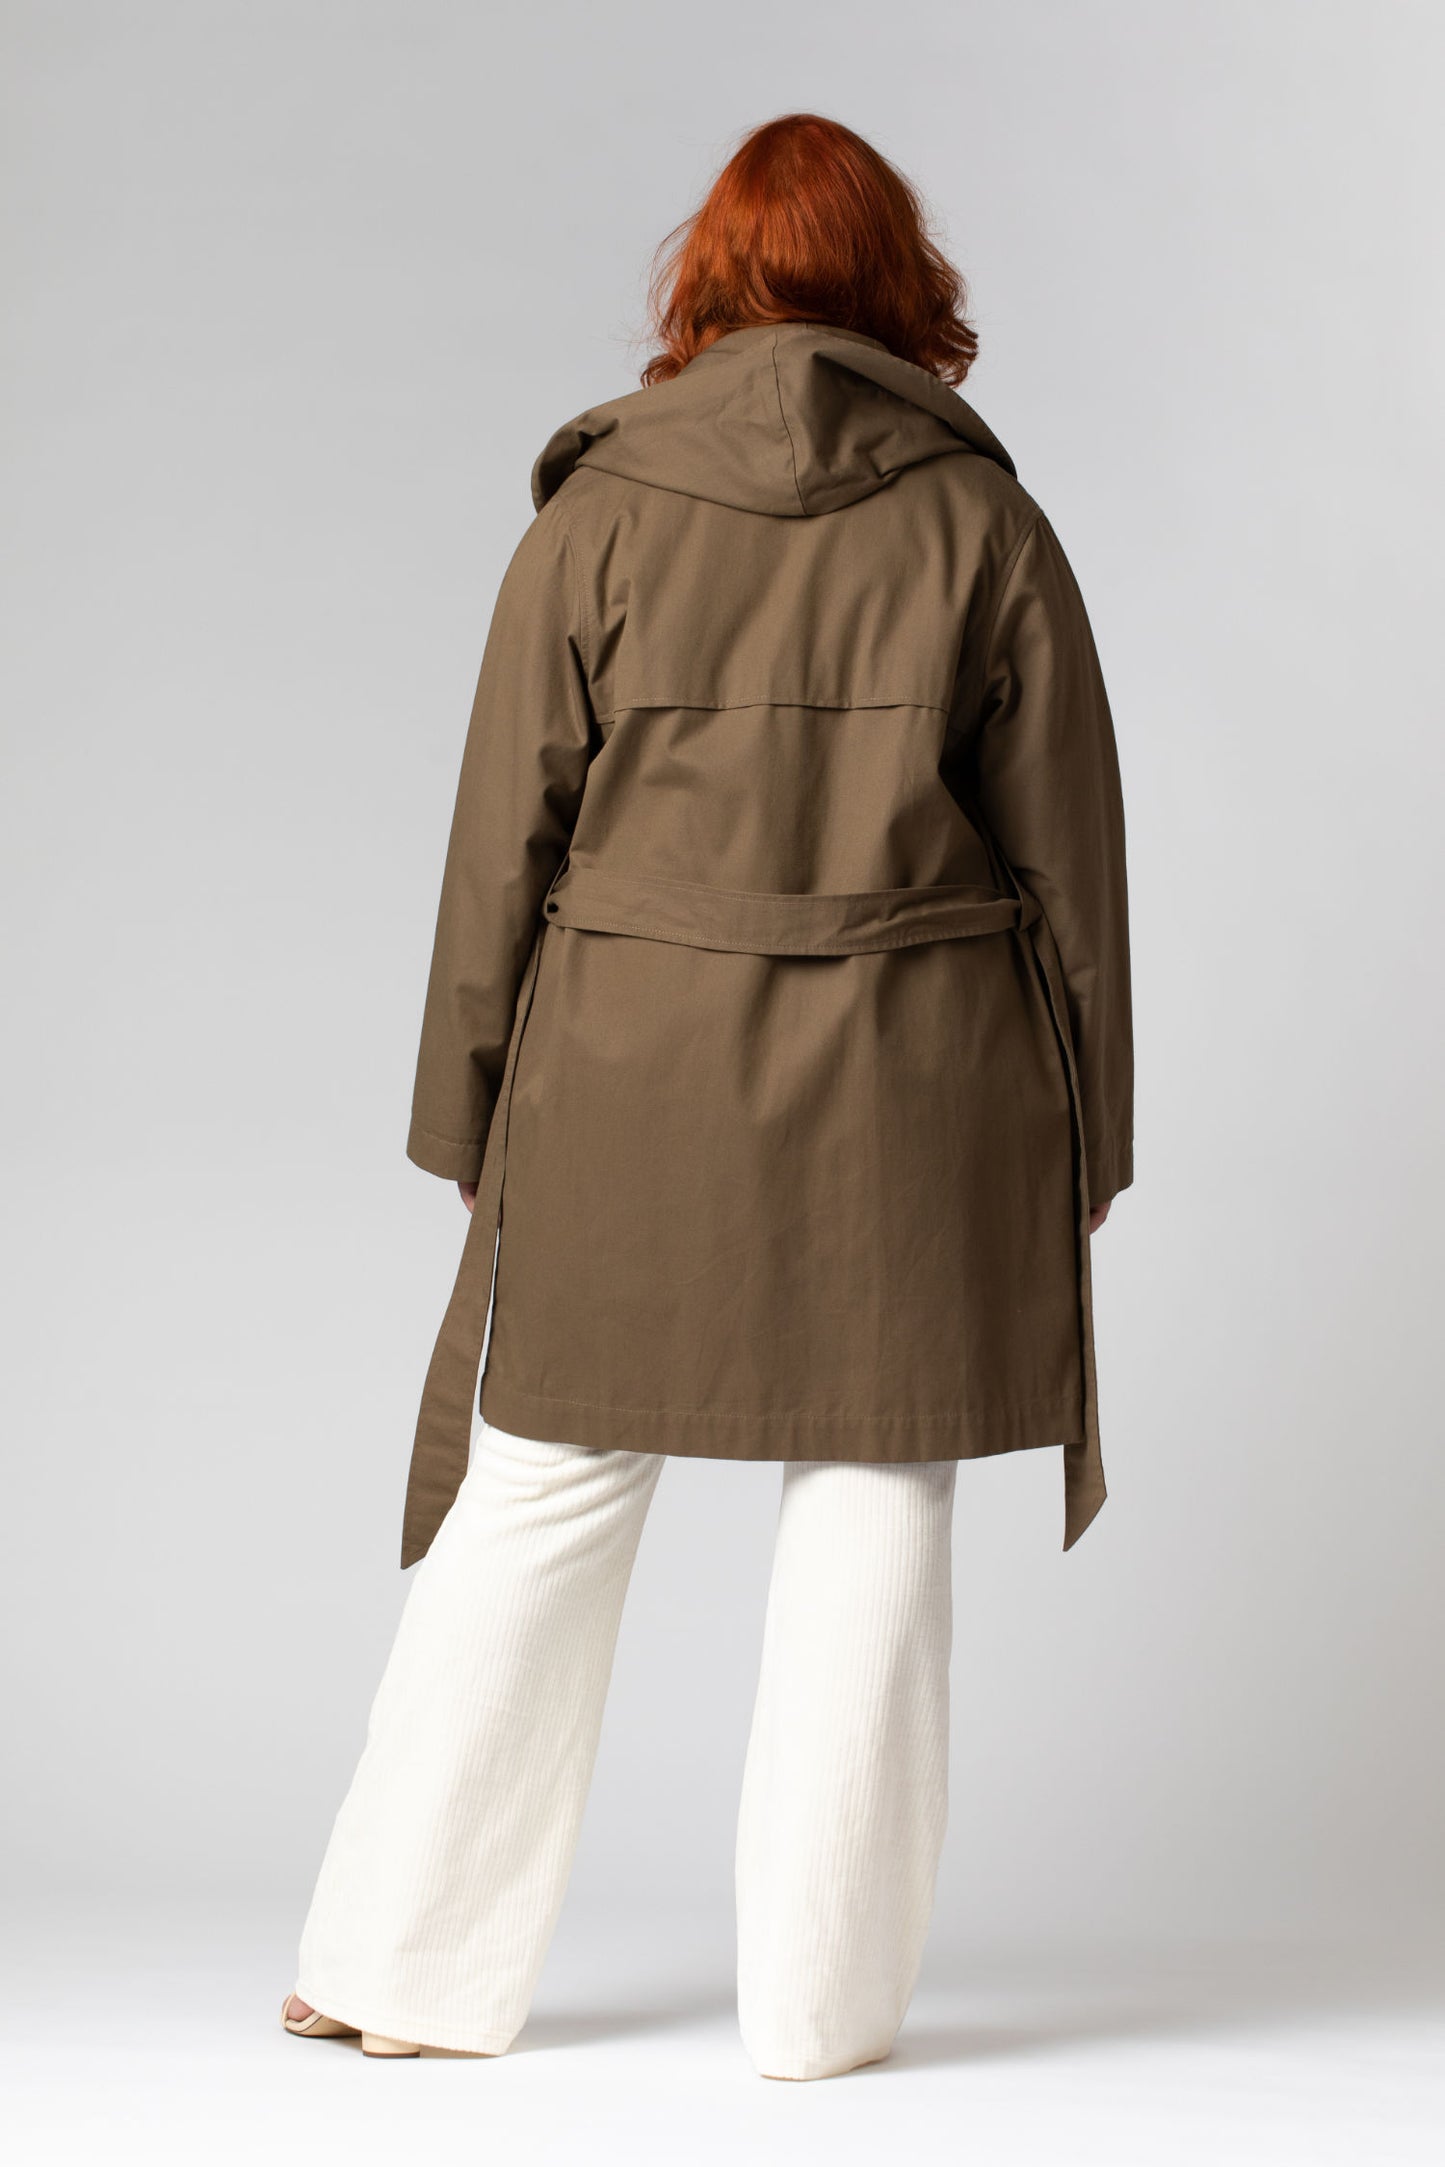 STELLA sustainable trench coat made of organic cotton, back